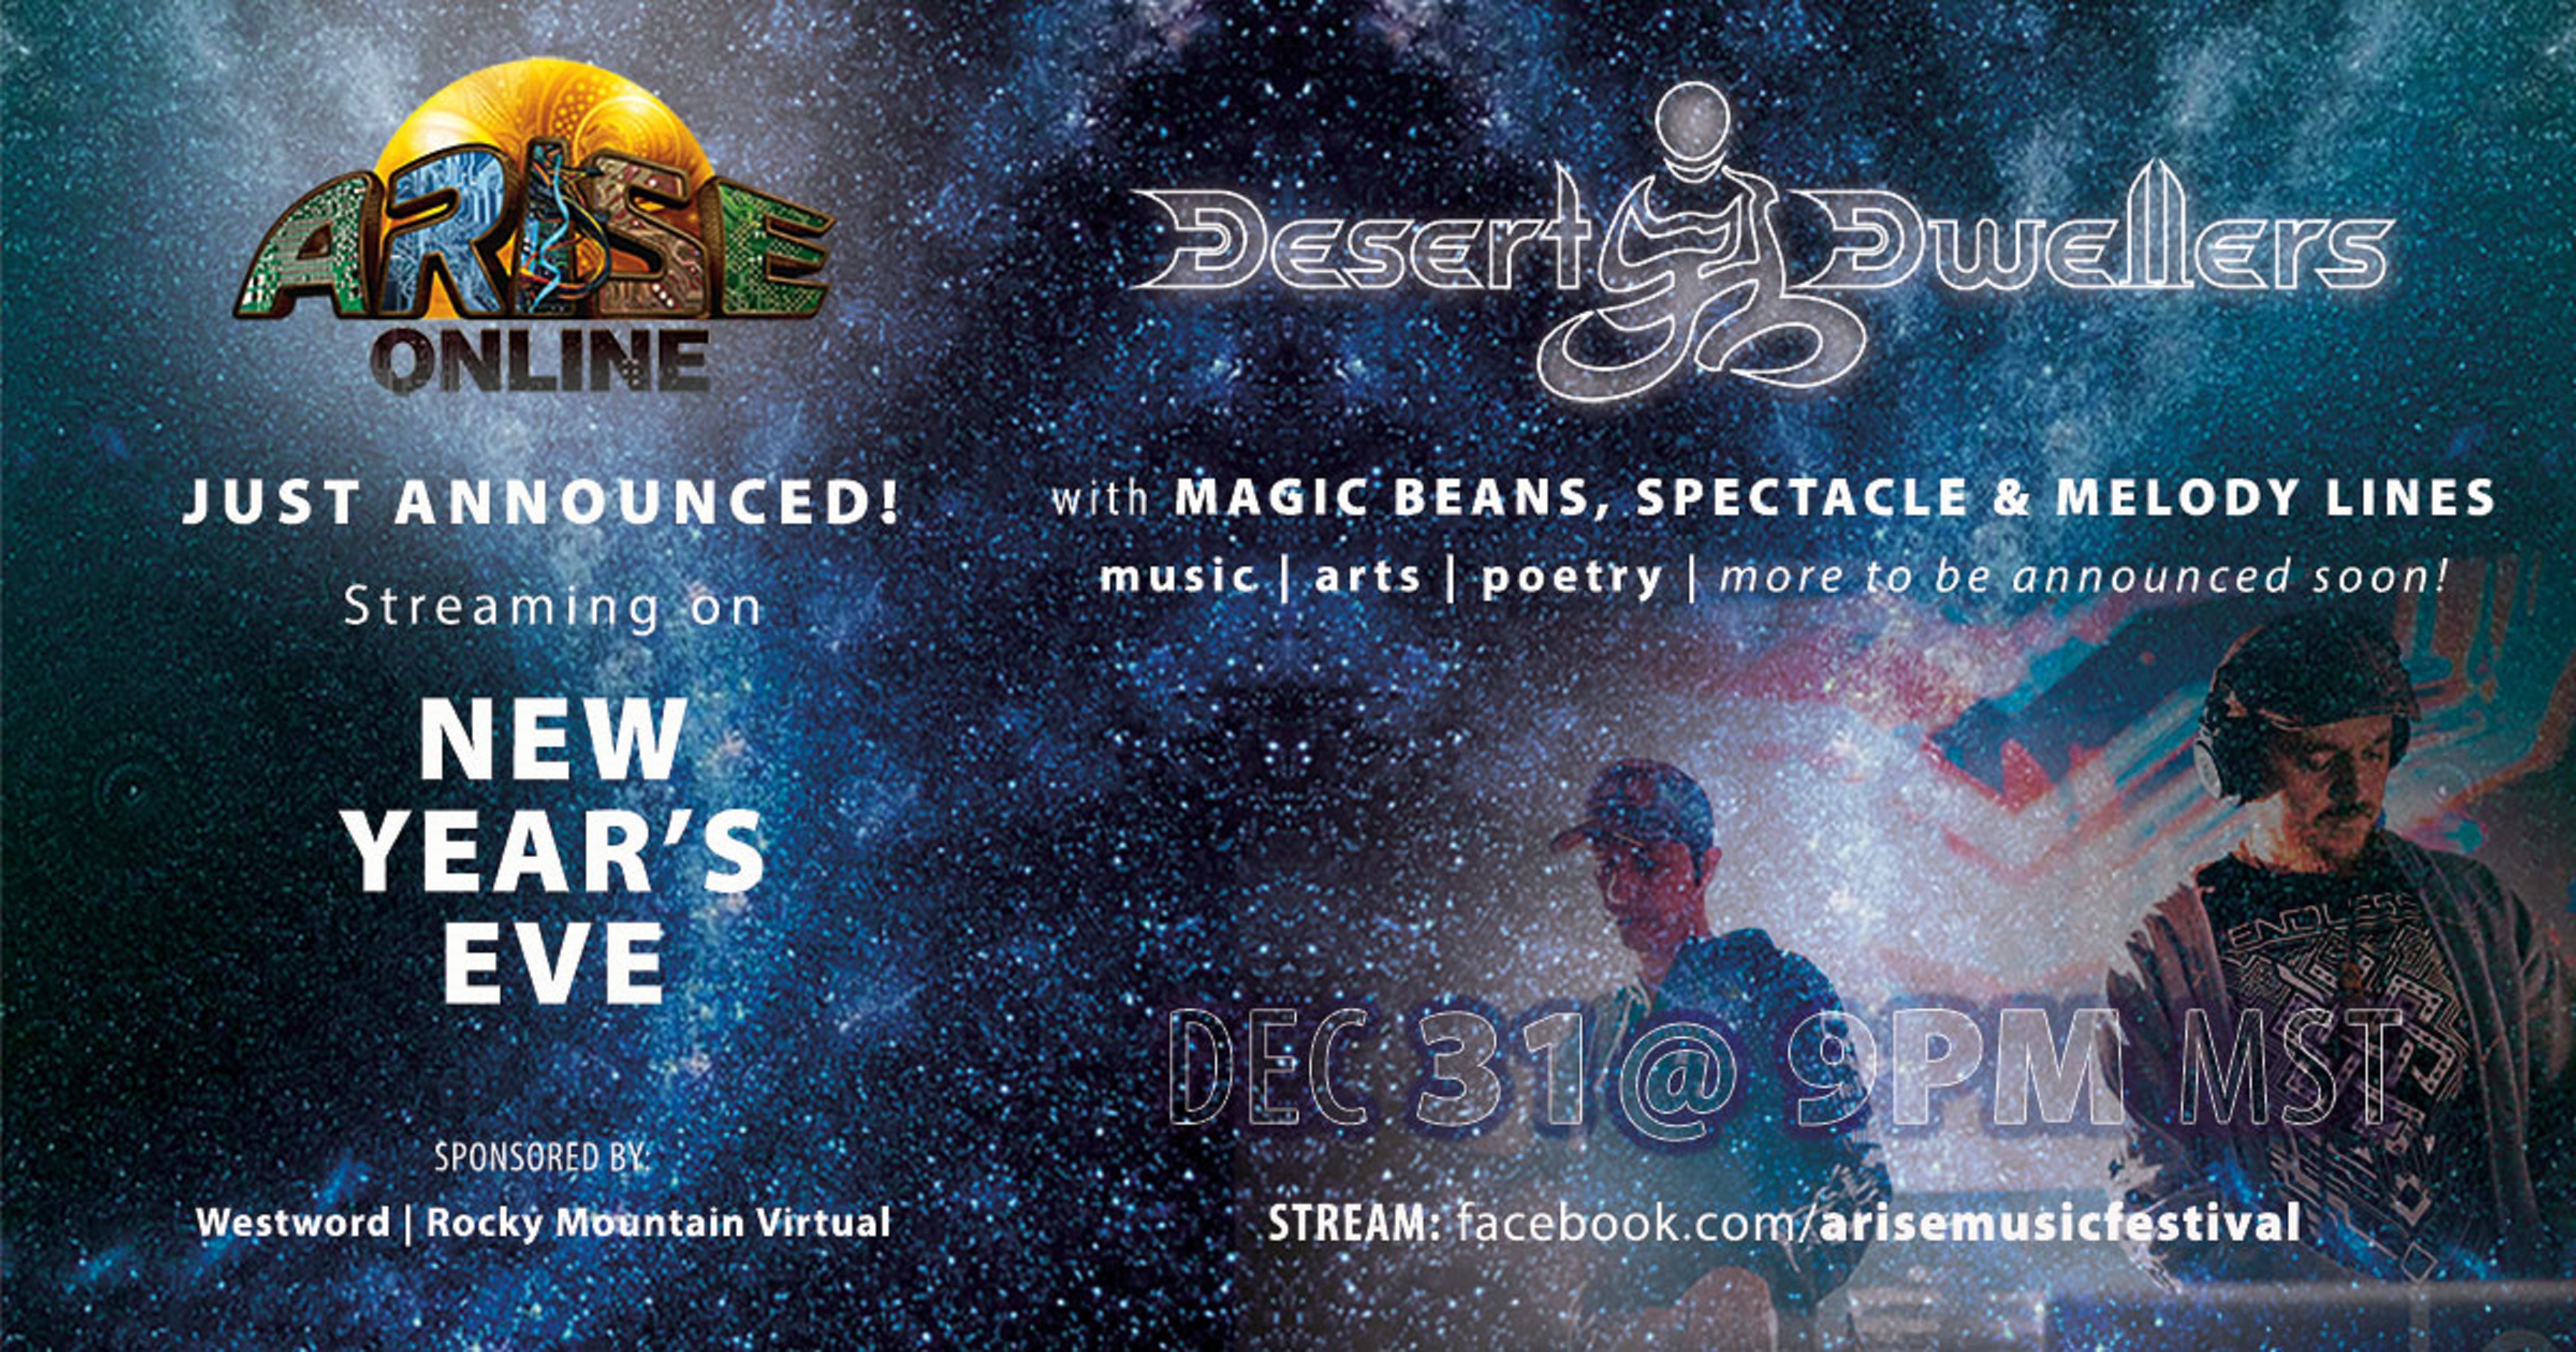 ARISE Music Festival Announces ARISE Online NYE featuring Desert Dwellers and more